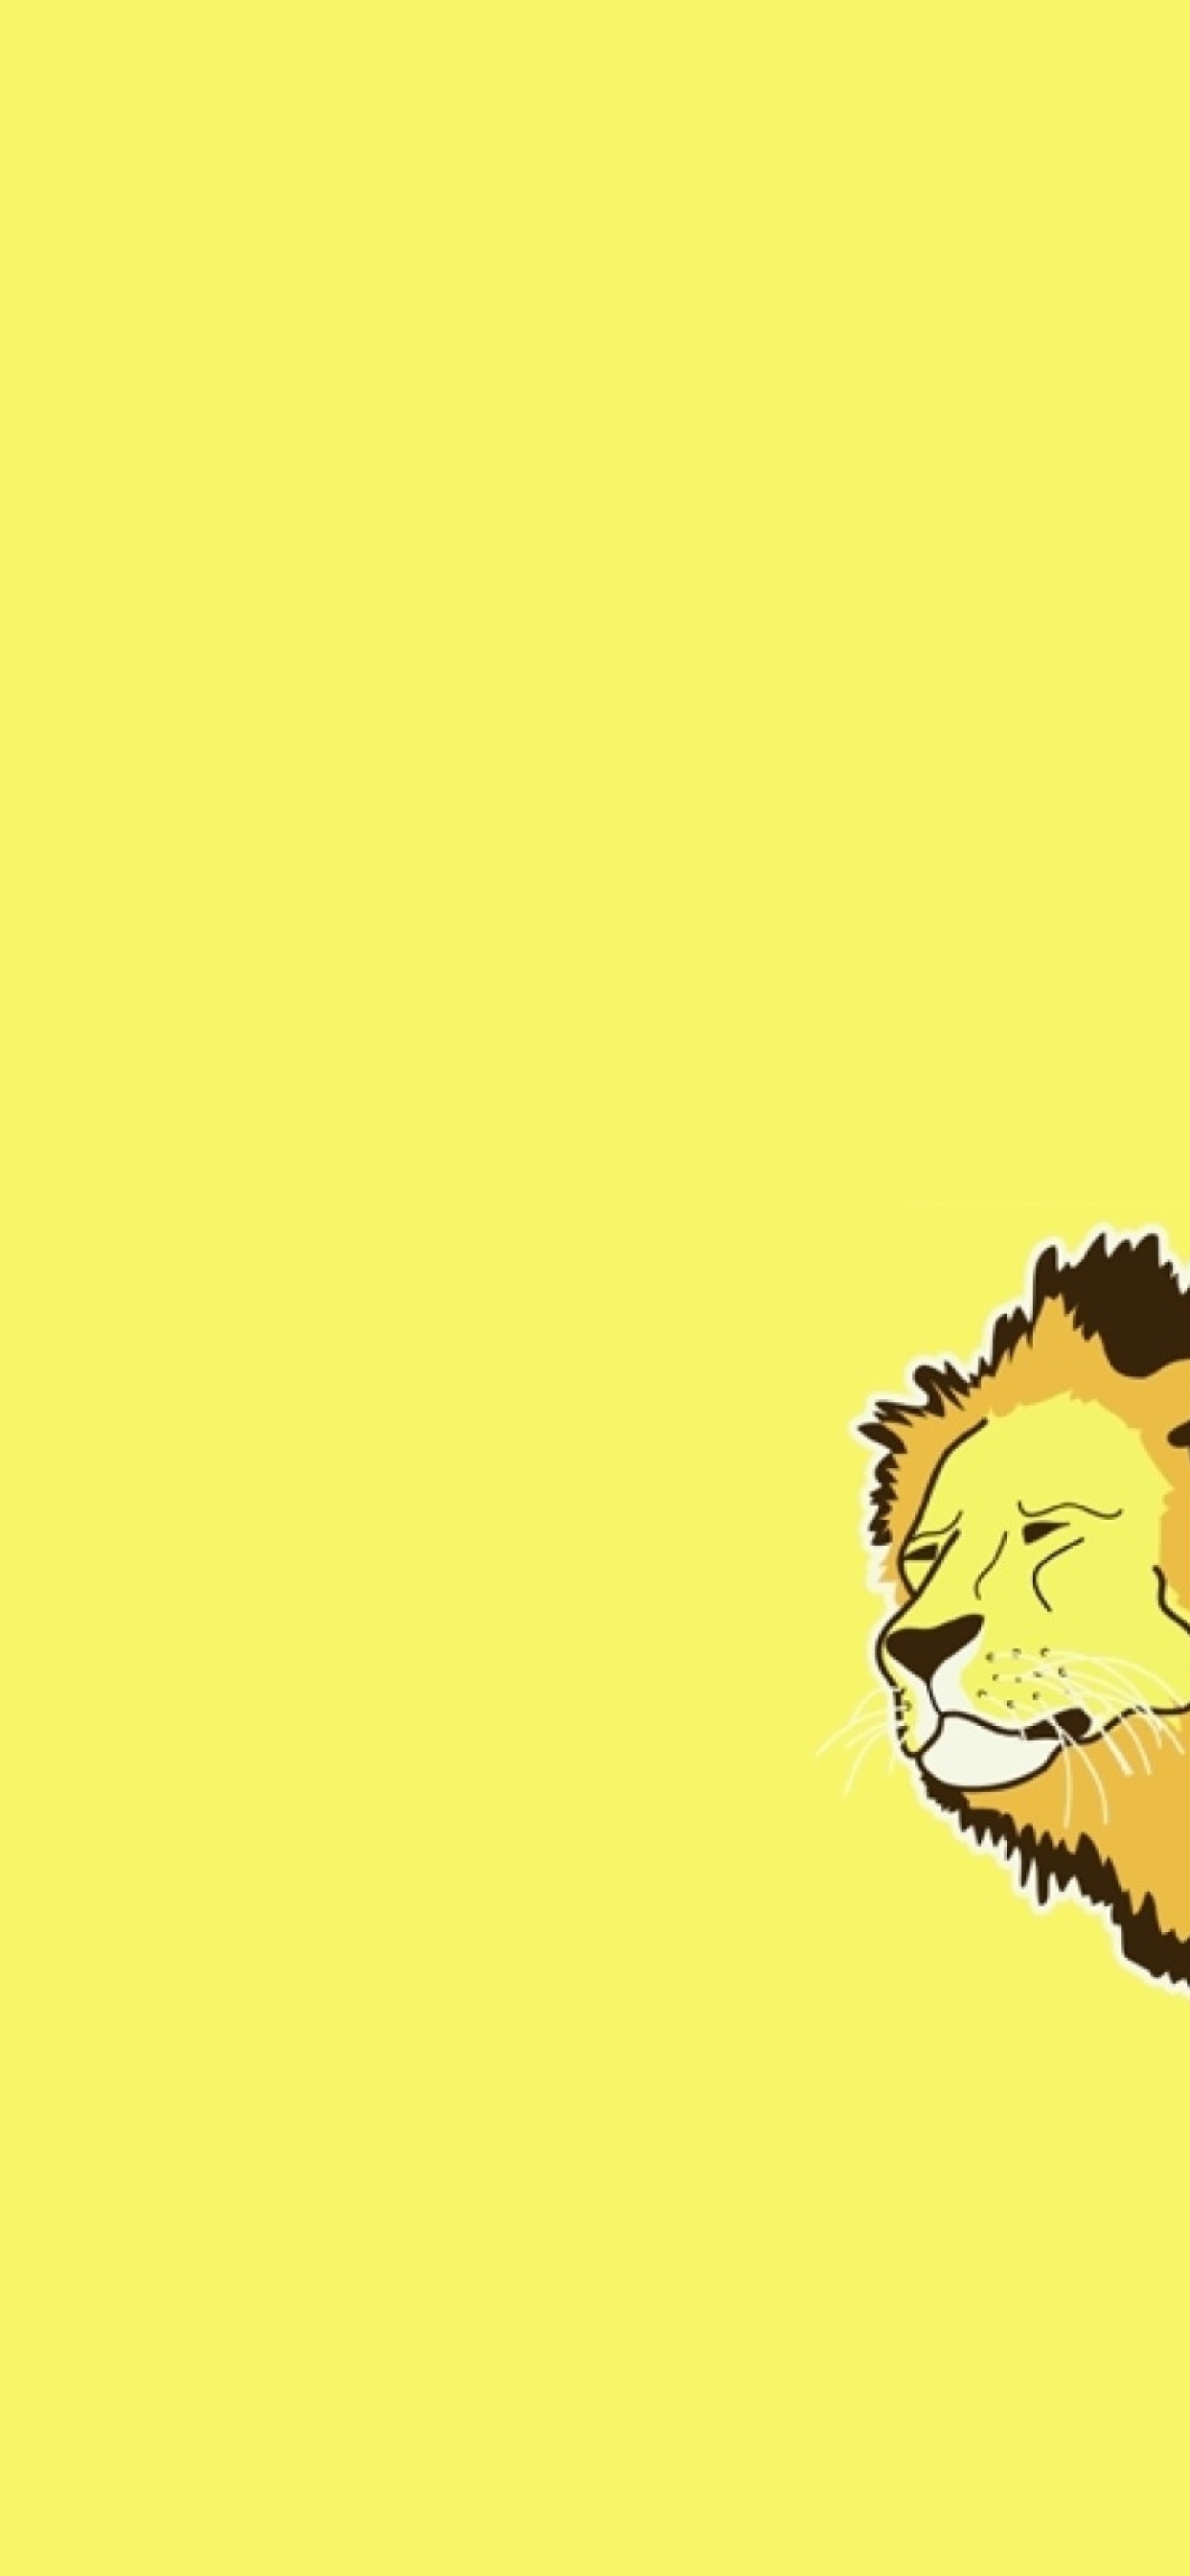 A yellow wallpaper with a cartoon lion on the right side - Lion